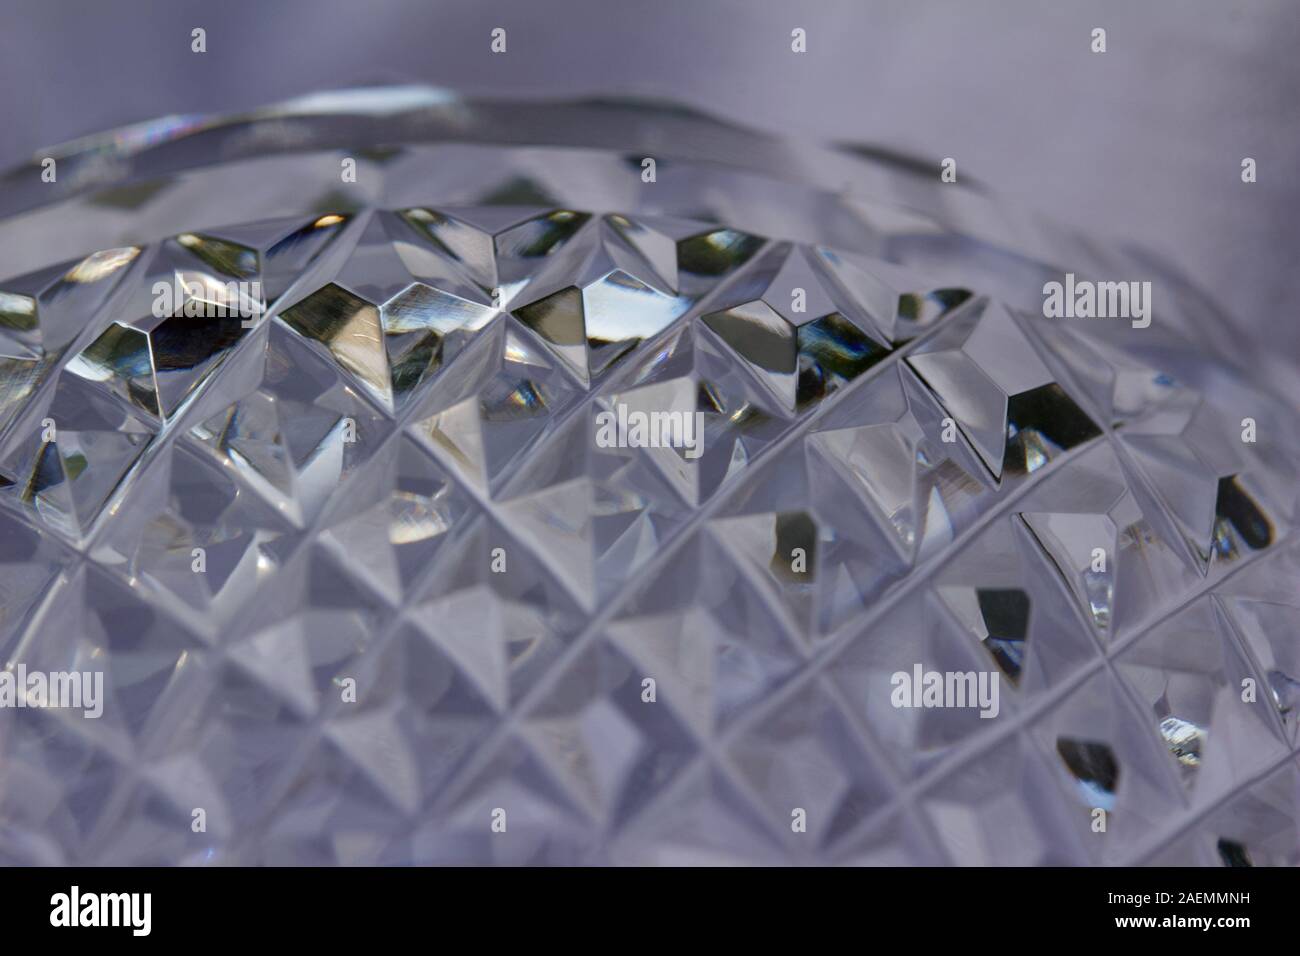 Macro abstract texture background of sparkling hand-cut lead crystal glass with diamond facets, reflecting bright natural light Stock Photo